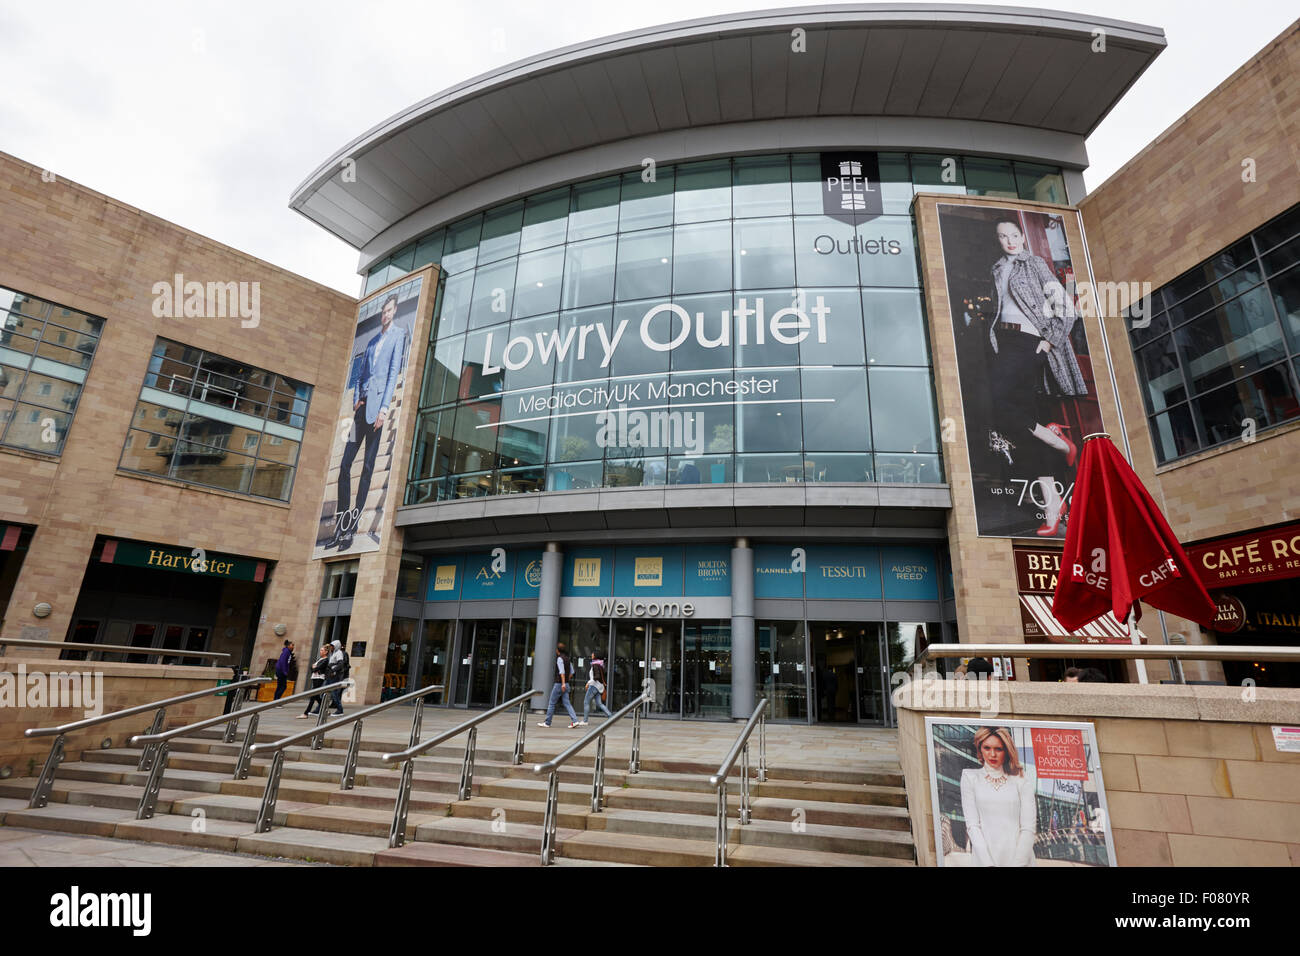 Der Lowry Outlet Shopping Mall Manchester uk Stockfoto